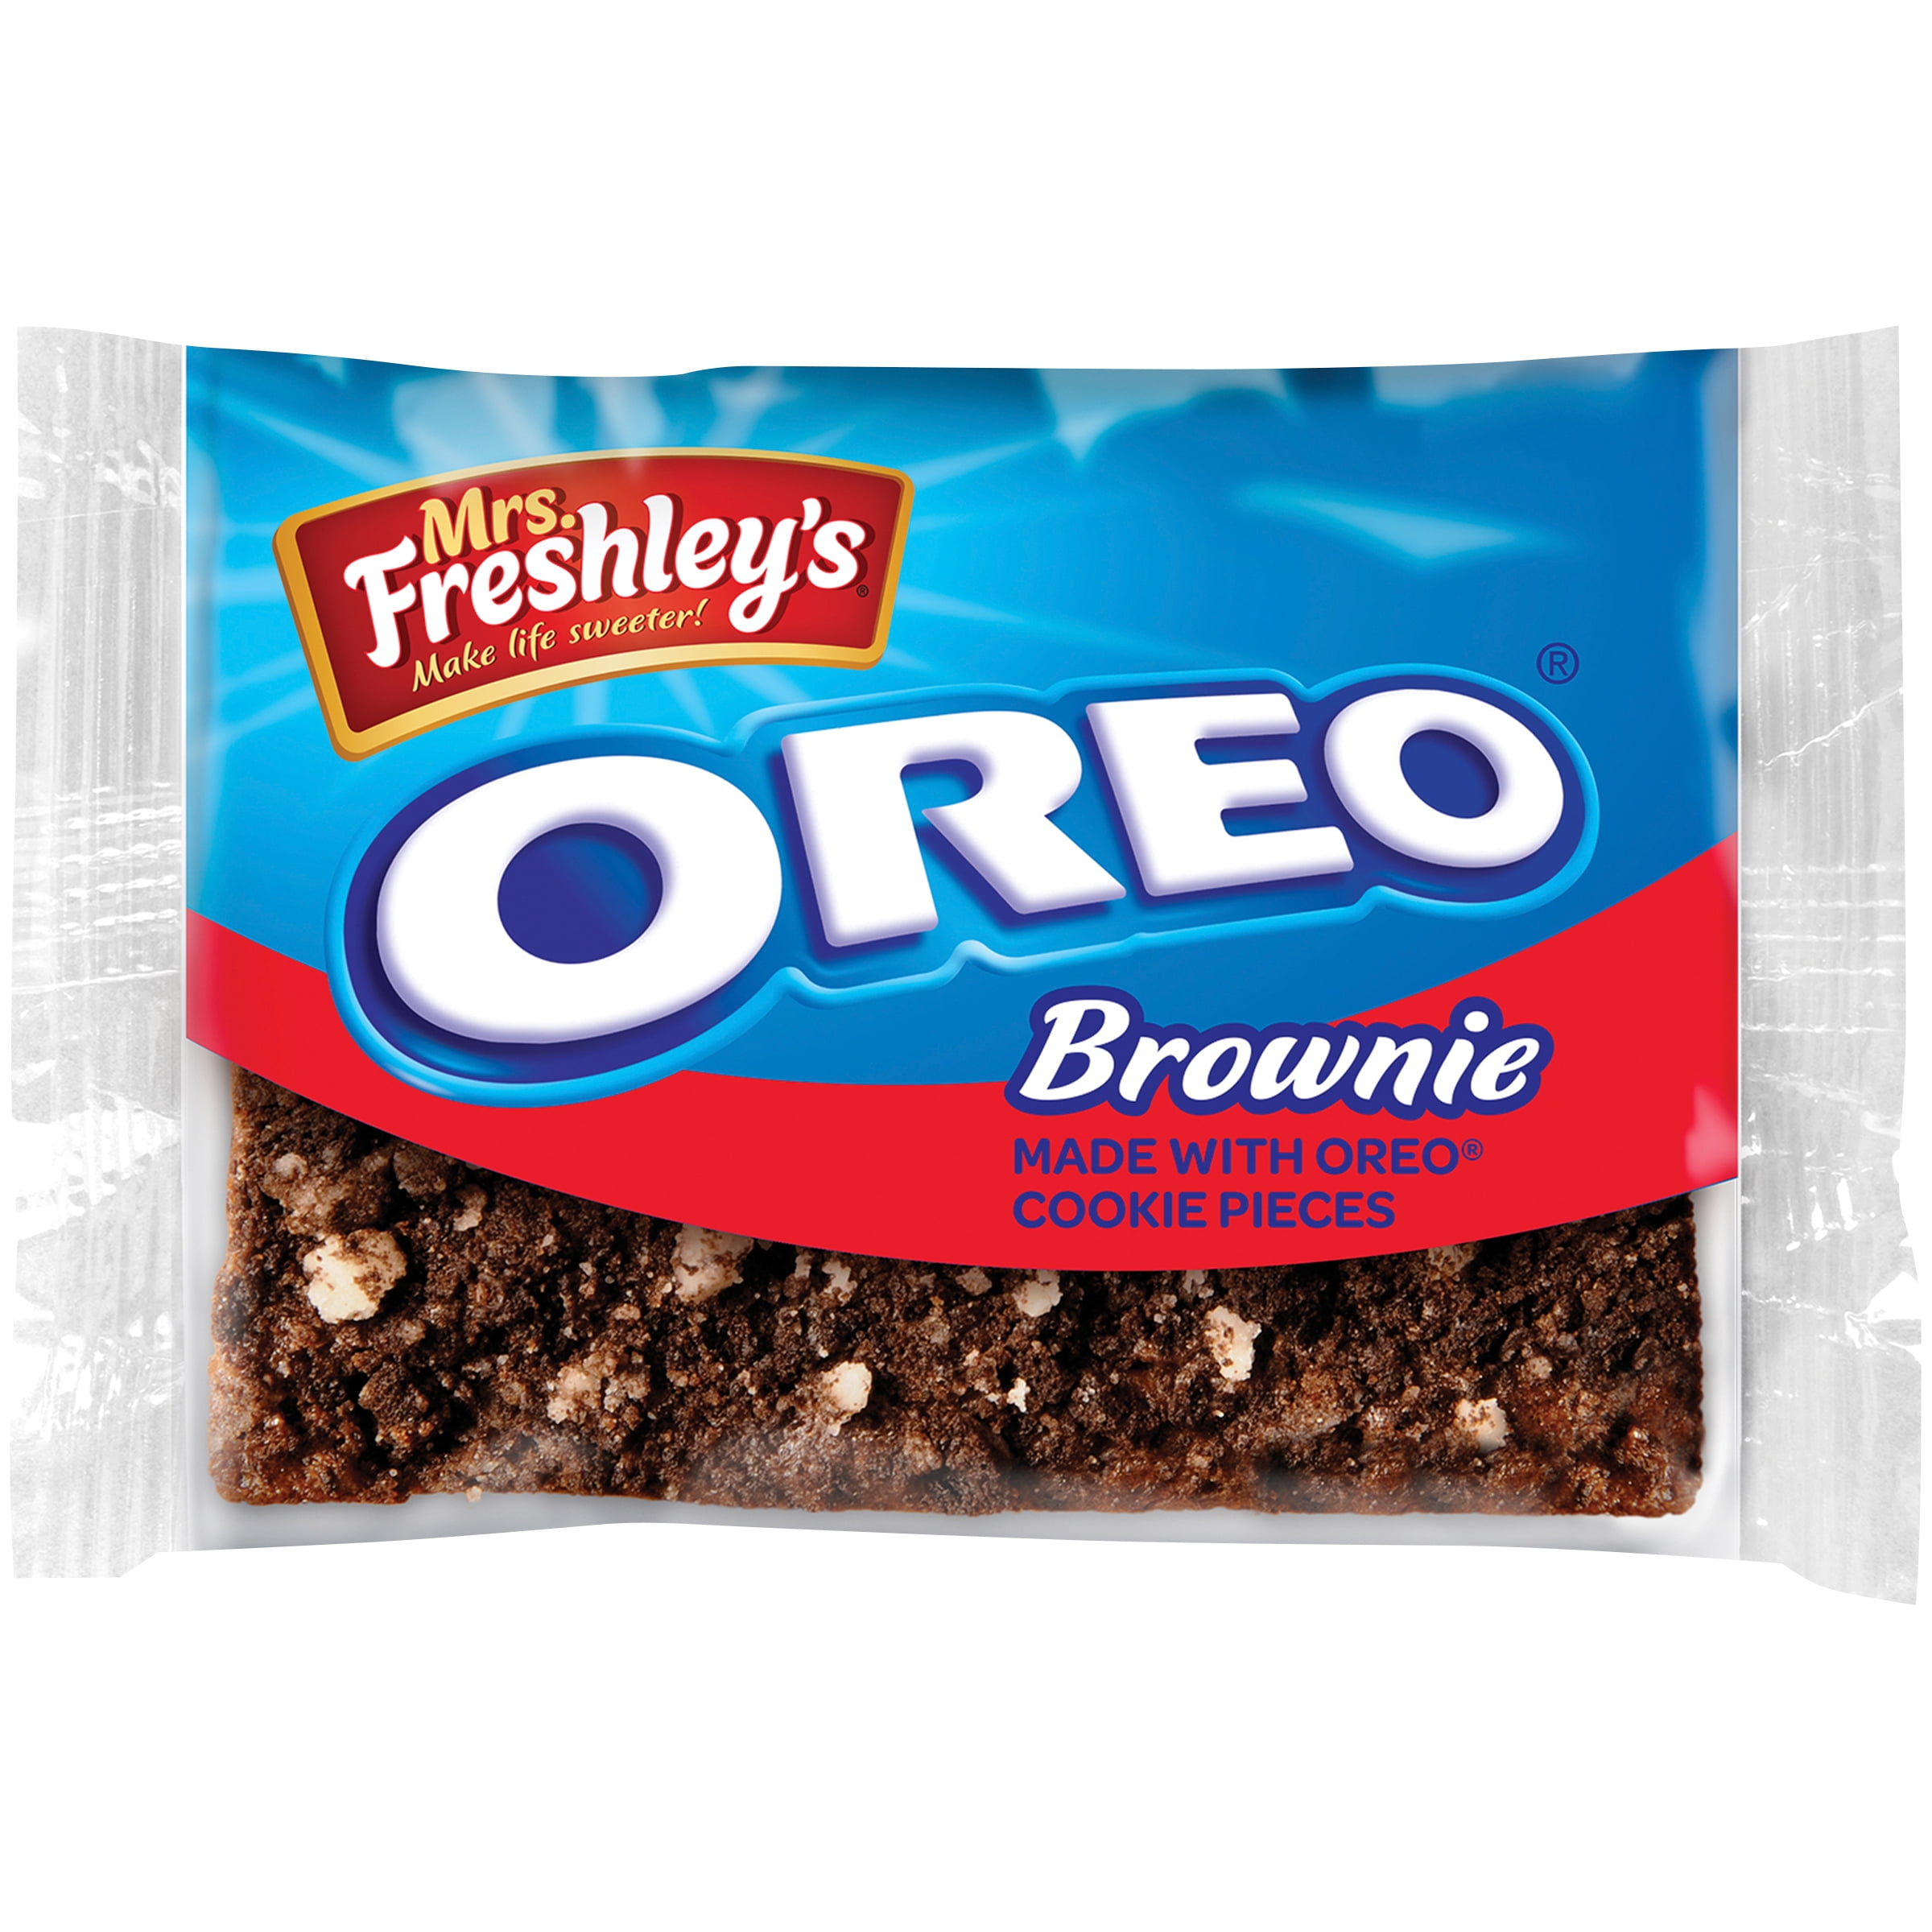 Mrs. Freshley's Mrs. Freshley’s® Deluxe Brownie made with OREO® cookie pieces